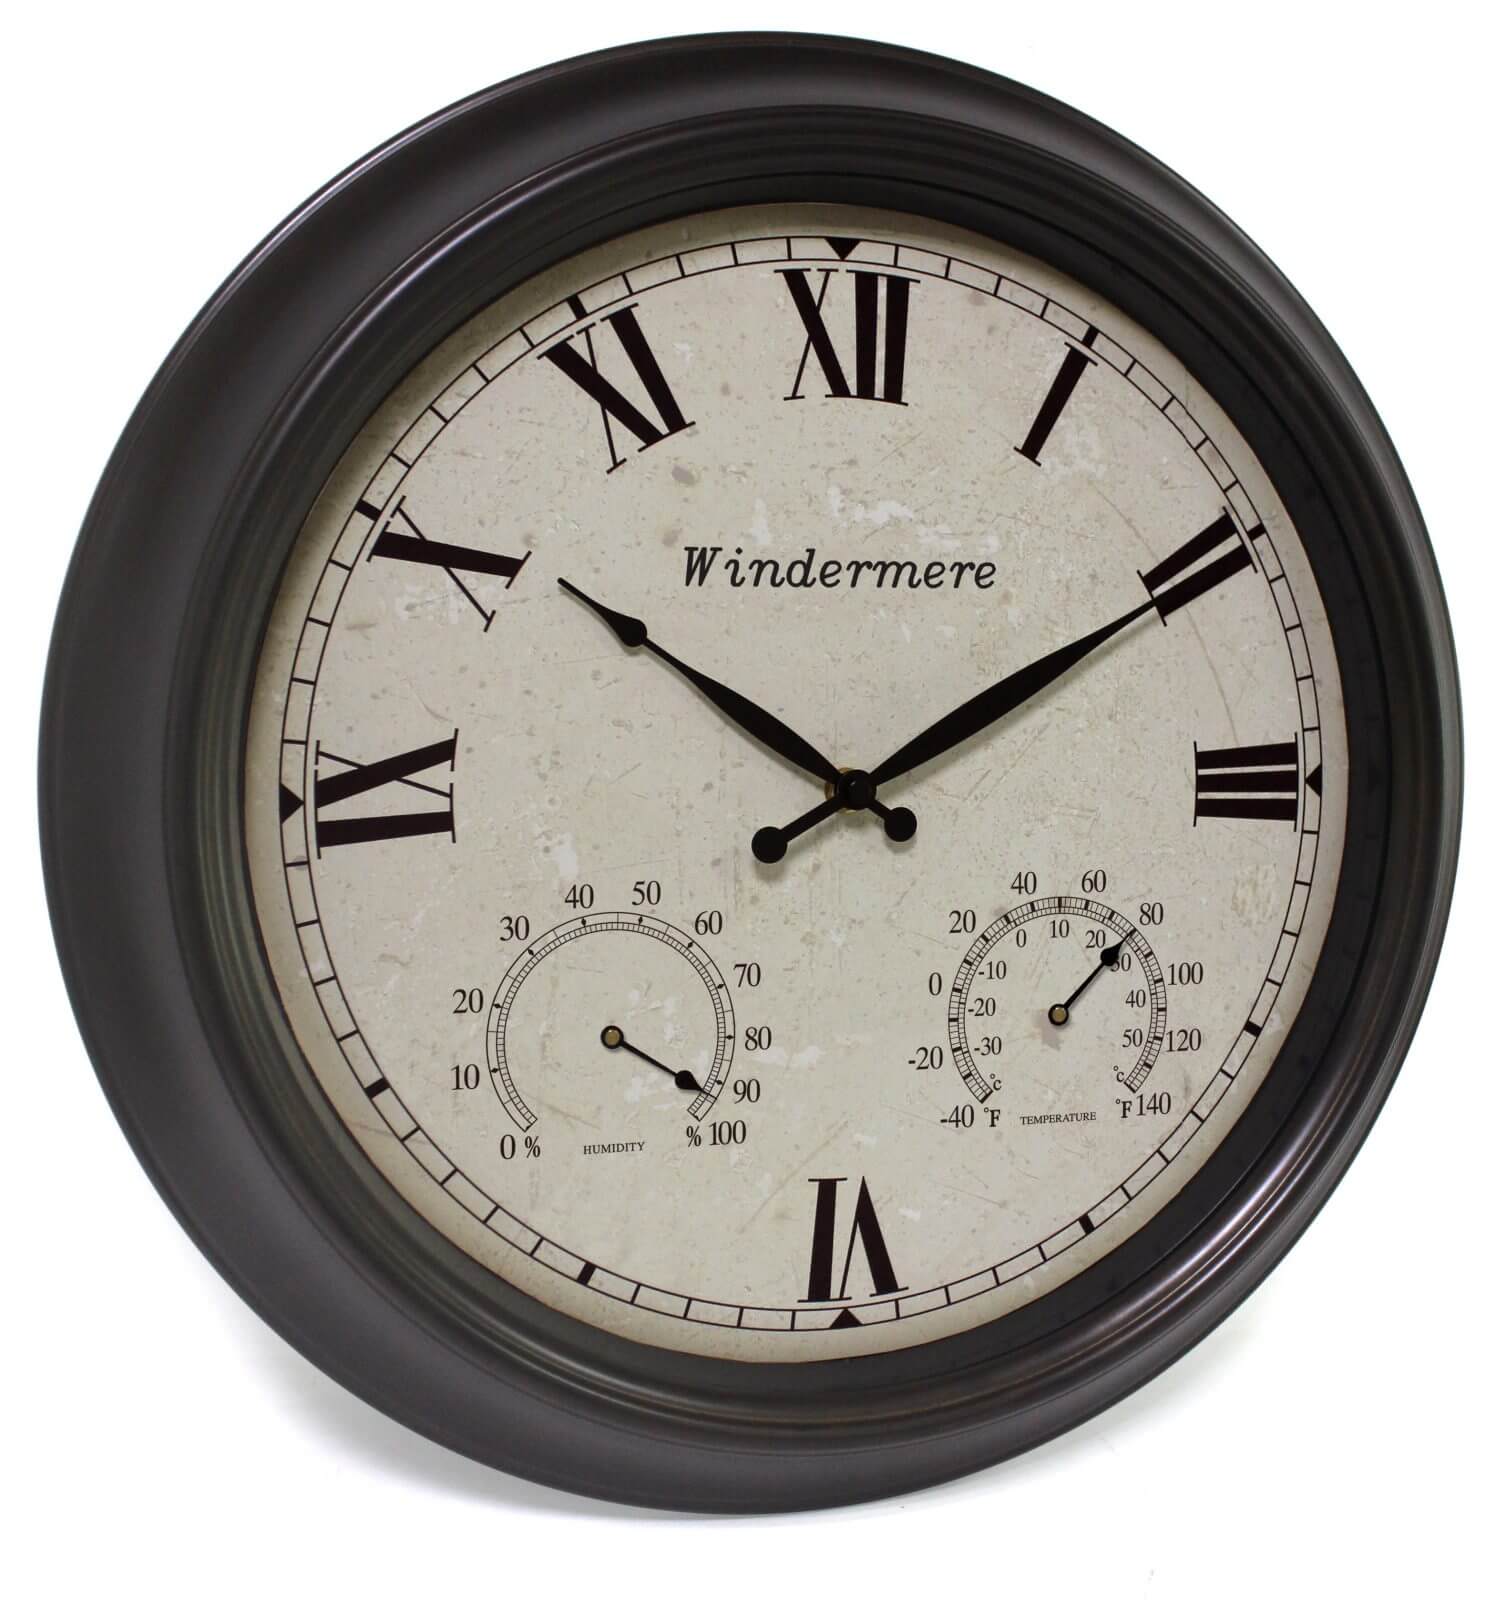 Jonart Design Windermere 46cm Wall Clock With barometer and thermometer Garden 